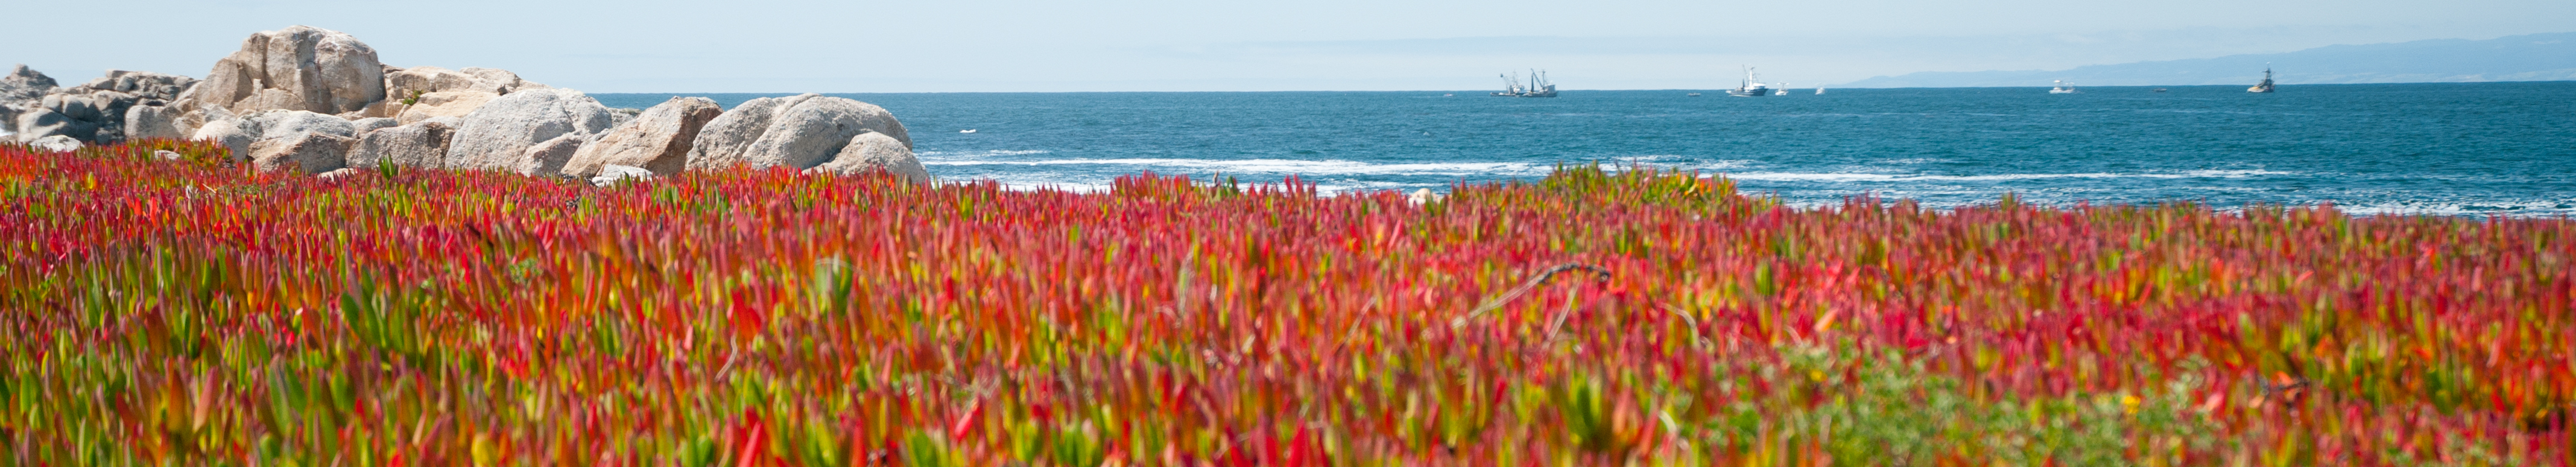 Ice plants in flower, Pacific Grove, CA